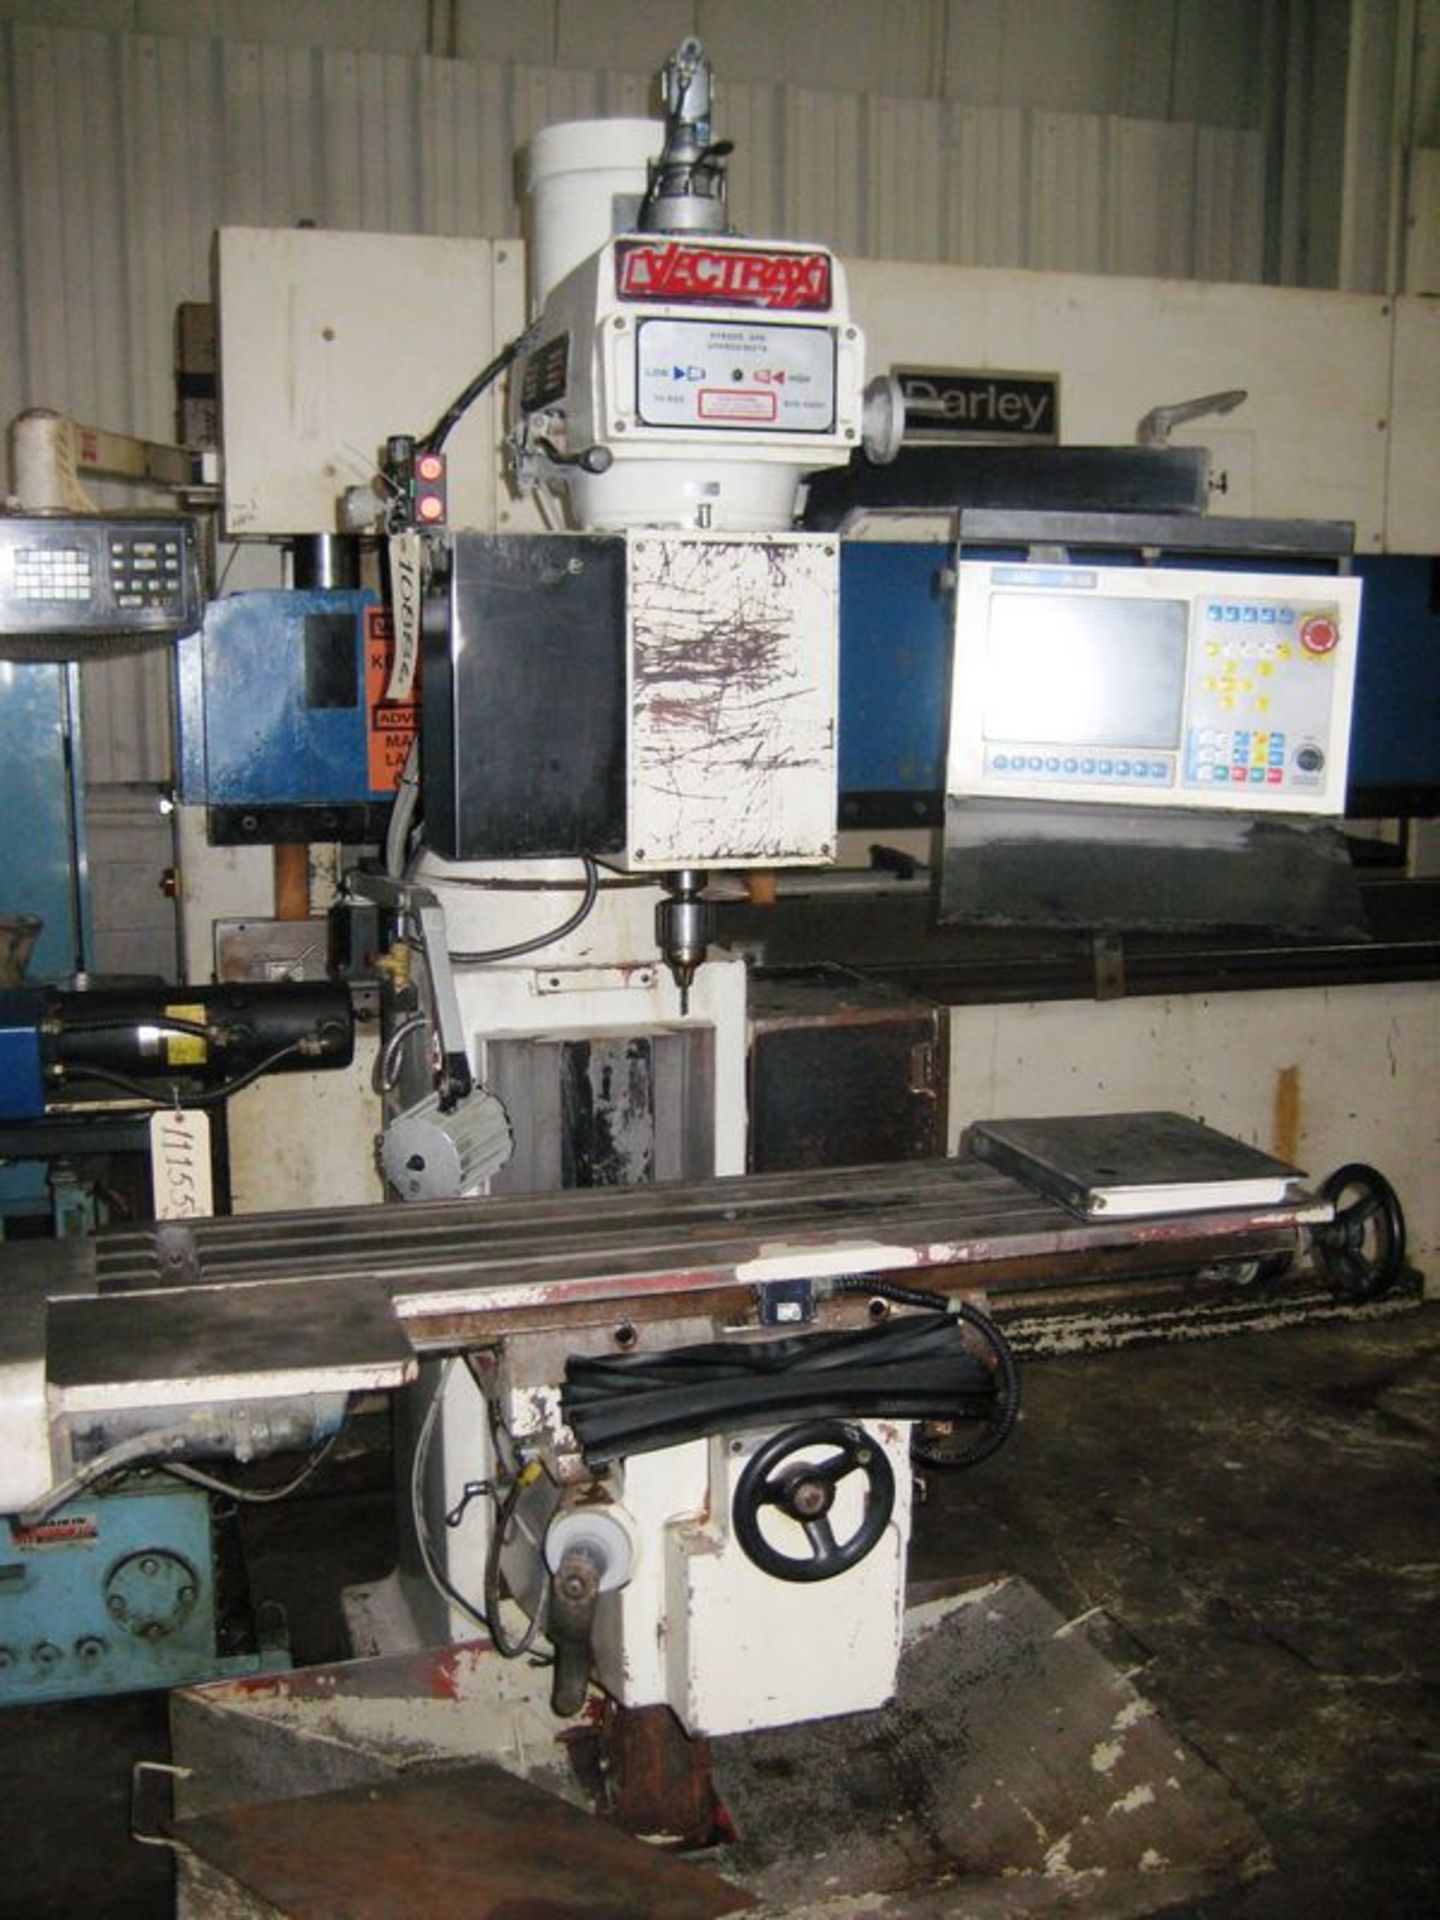 Vectrax GS-N16V 3-Axis CNC Knee Type Milling Machine, S/N 9030192NV, New 2001 Specifications, Table,